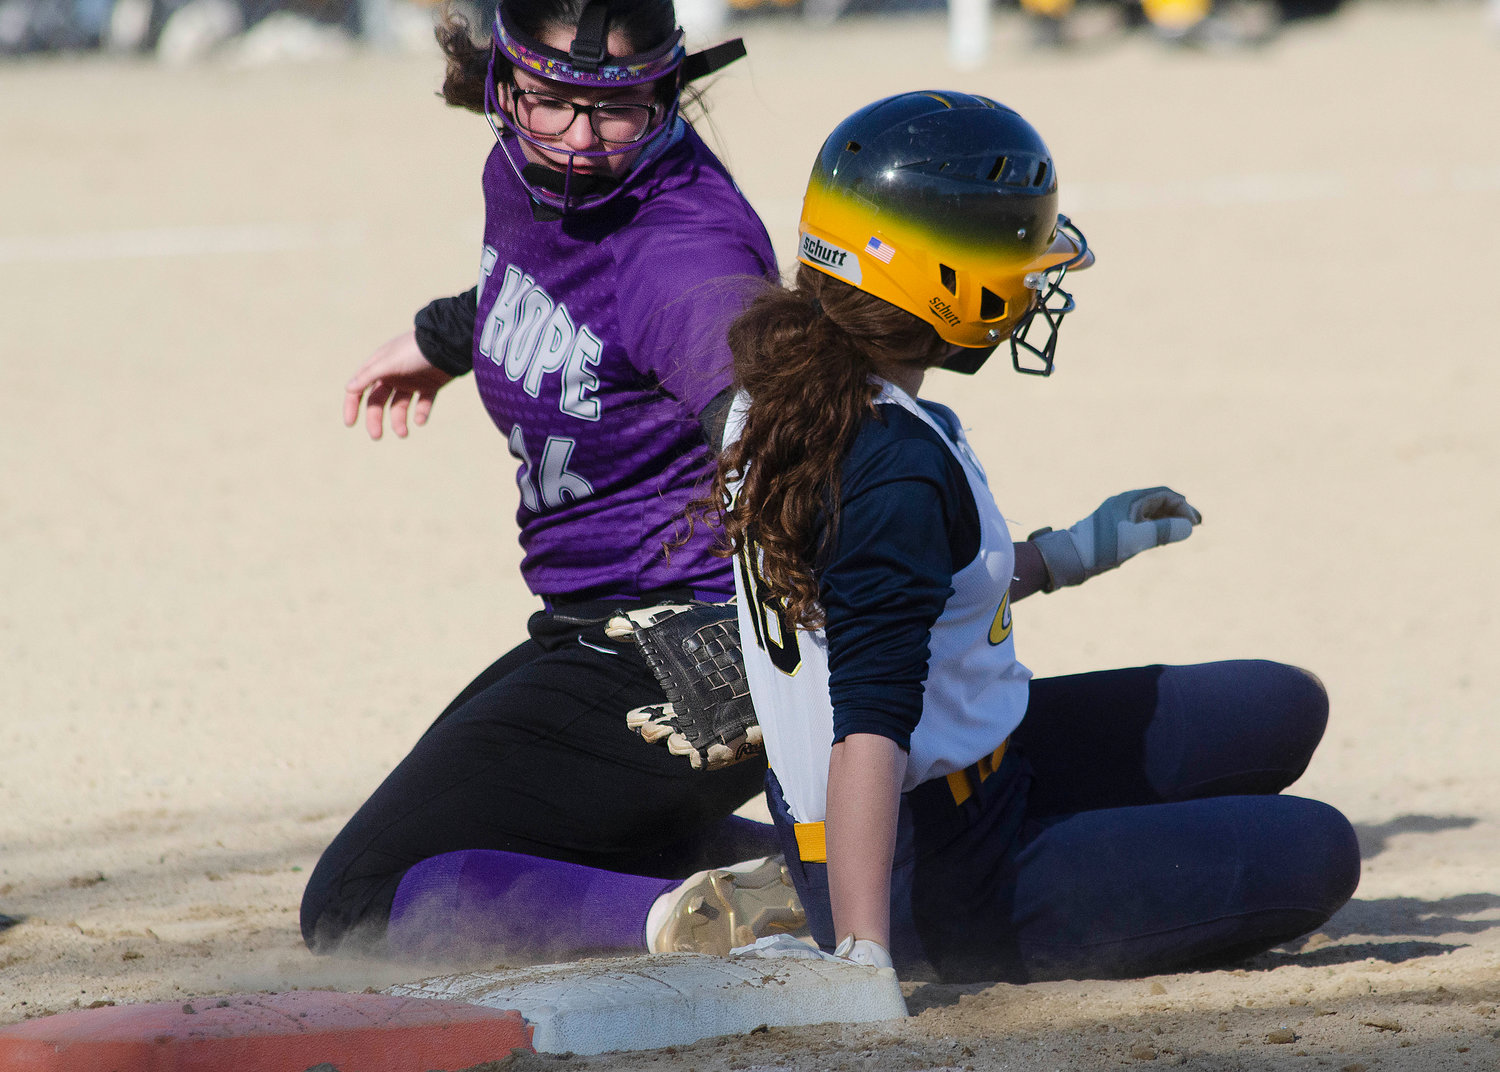 First baseman Sammy Malafronte slaps a tag on an Eagles baserunner after taking a throw from catcher Grace Stephenson who was attempting to pick the runner off.